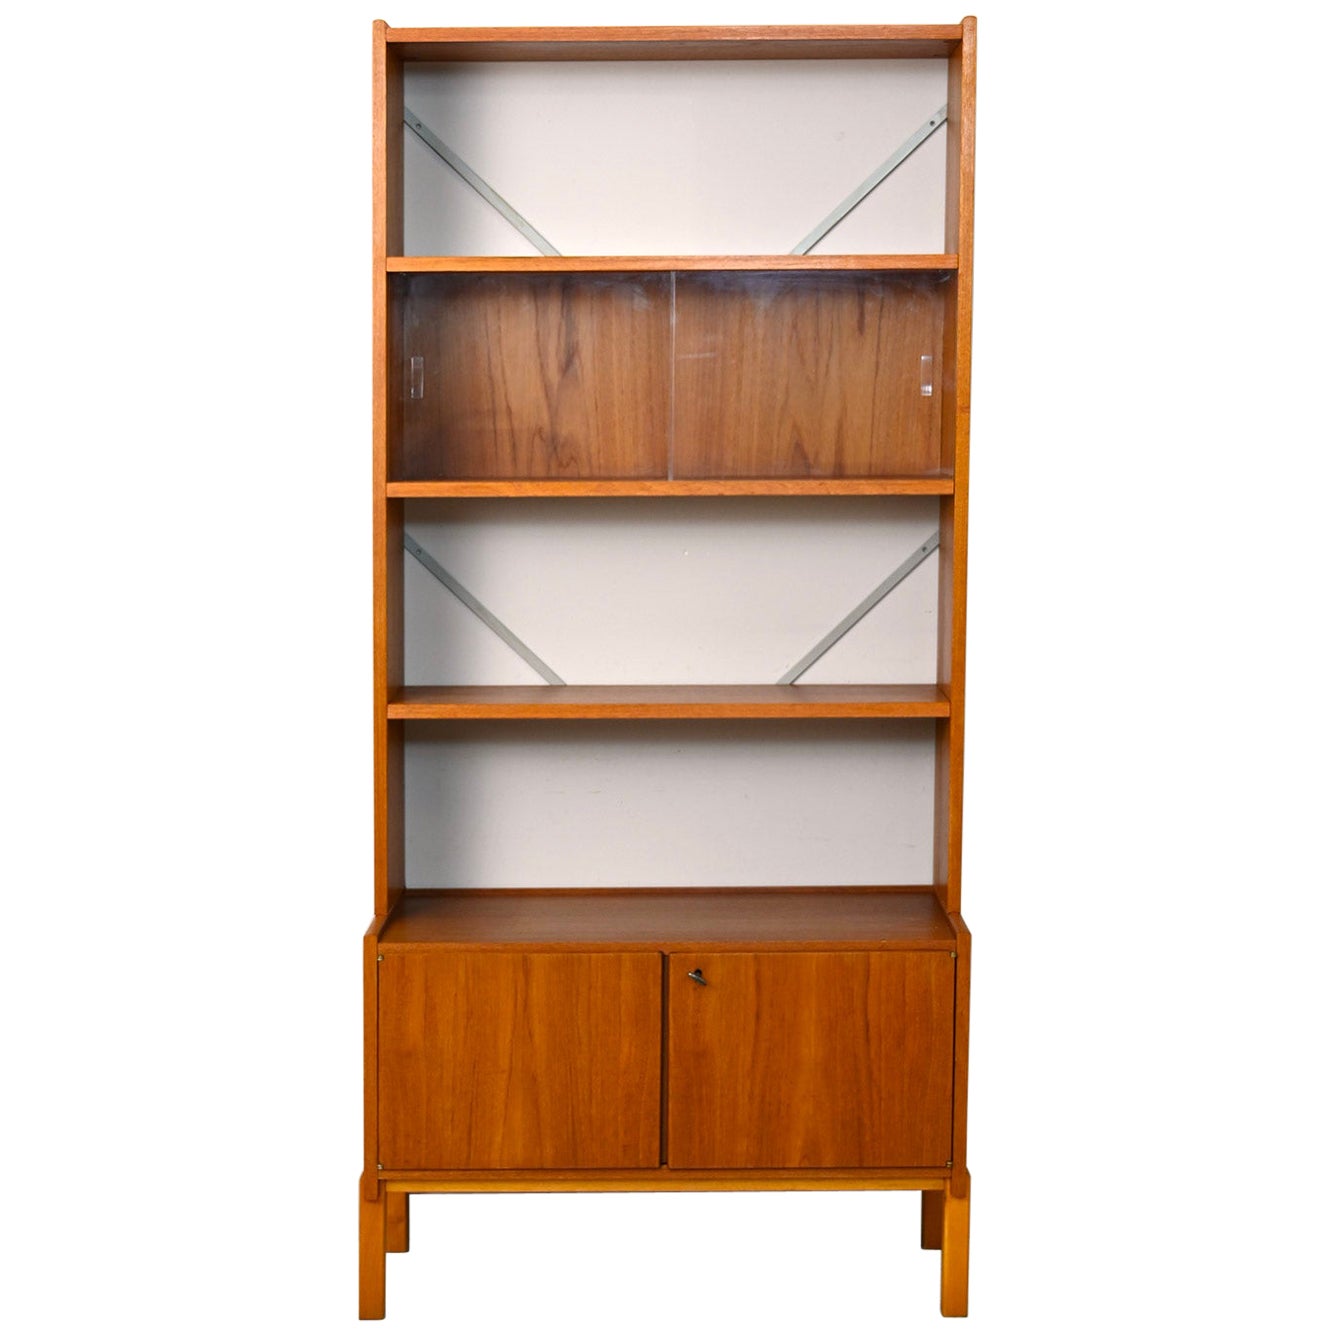 1960s teak cabinet with display cabinet